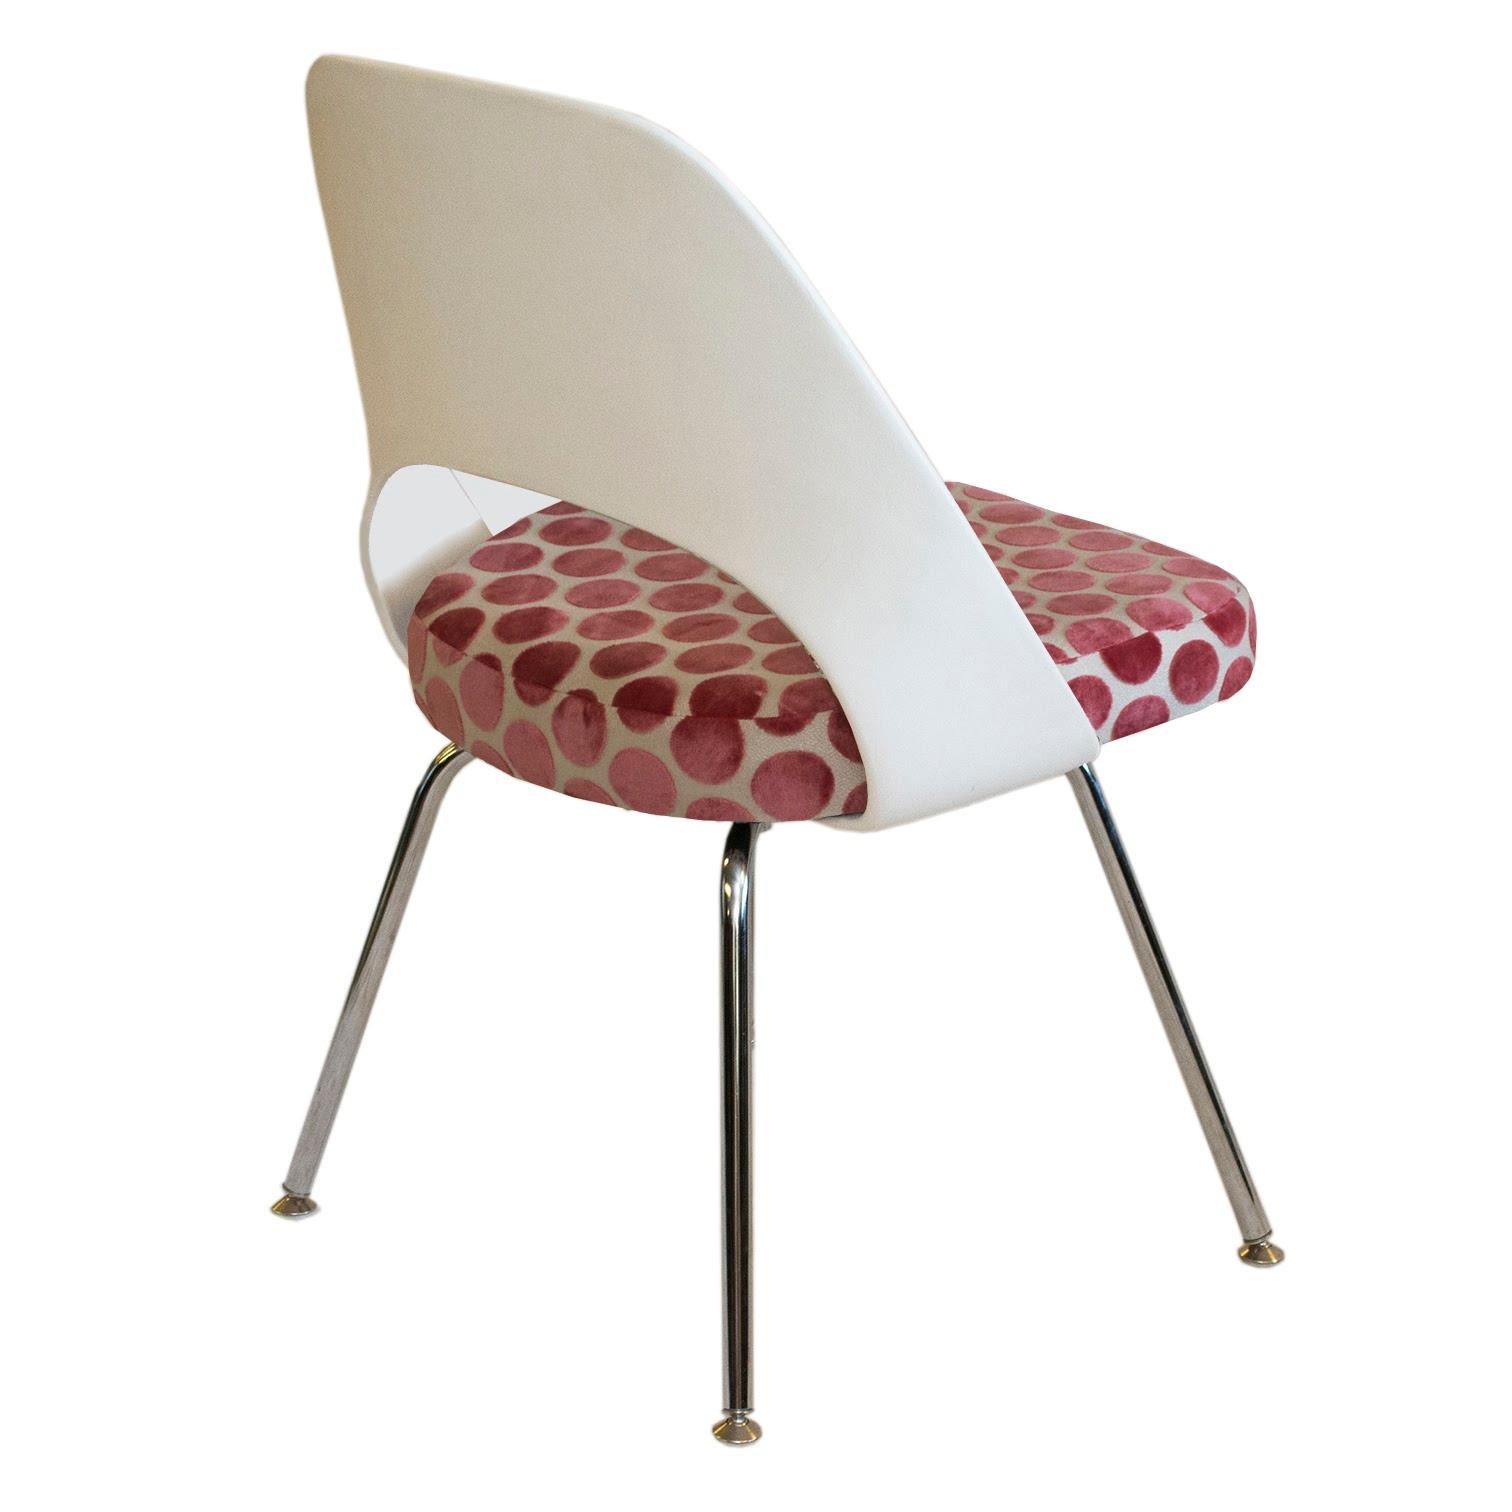 Knoll Armless Saarinen Chair Polka Dot Deluxe In Excellent Condition For Sale In Wilton, CT